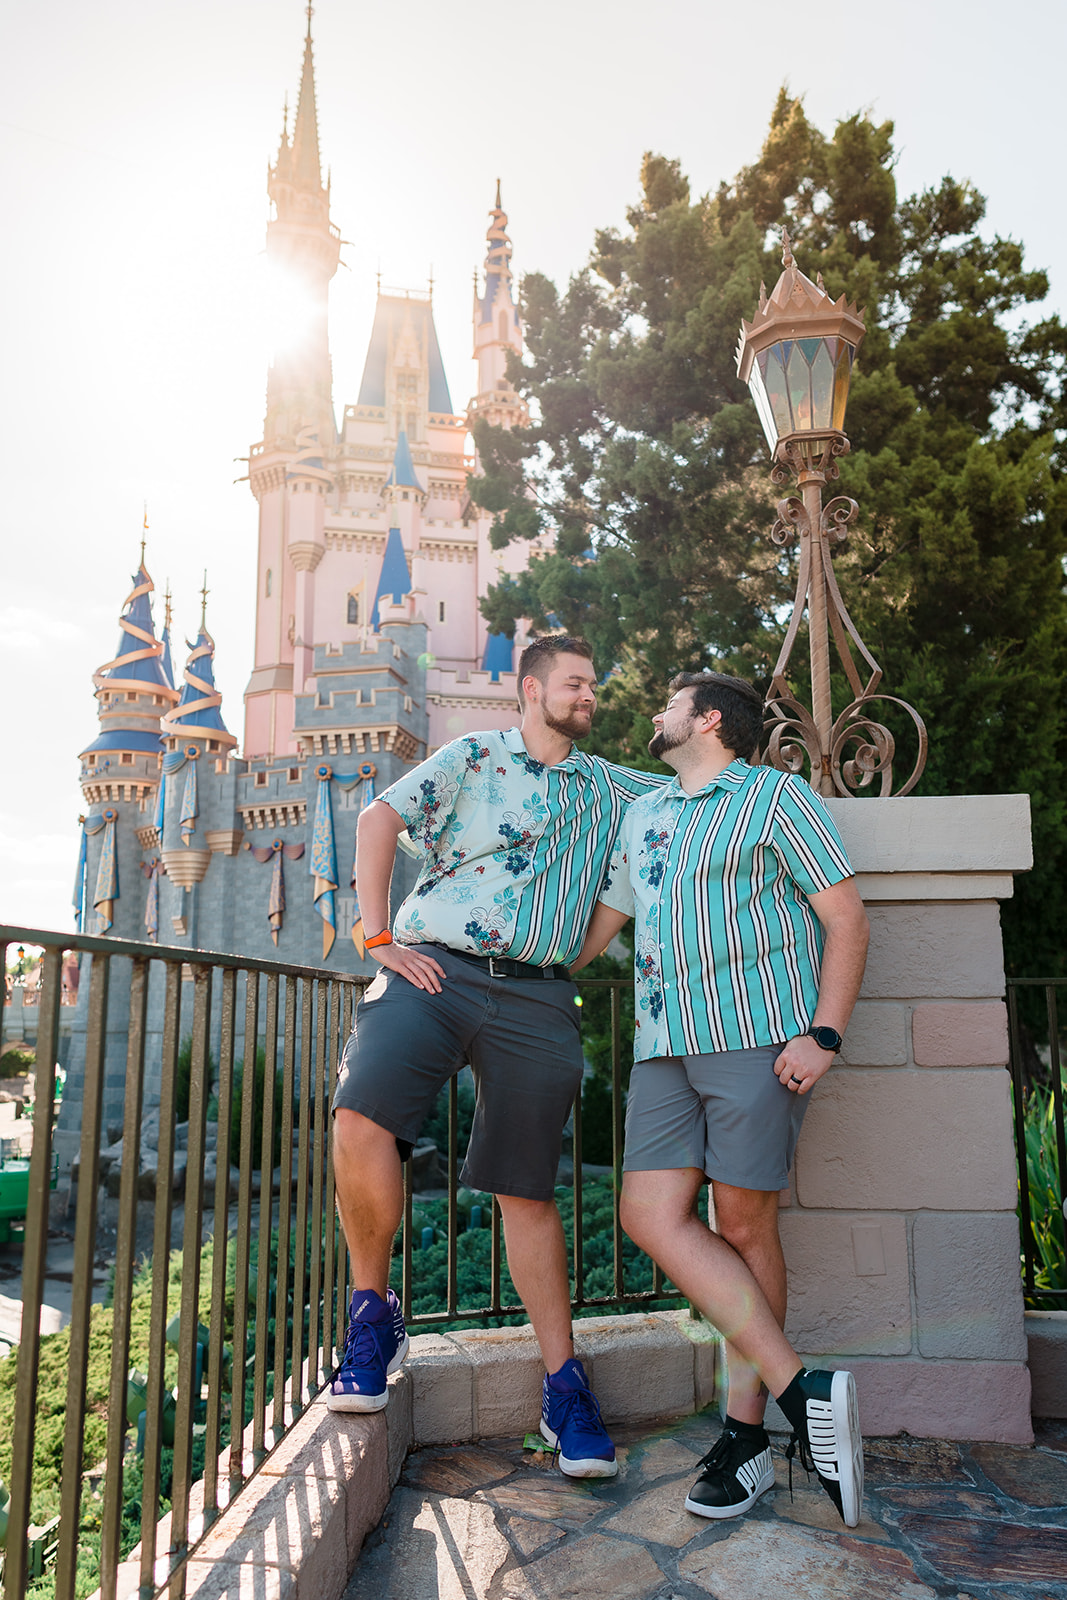 Two grooms smile at each other with the iconic Disney castle in the background, capturing a perfect moment of love and joy at Magic Kingdom.